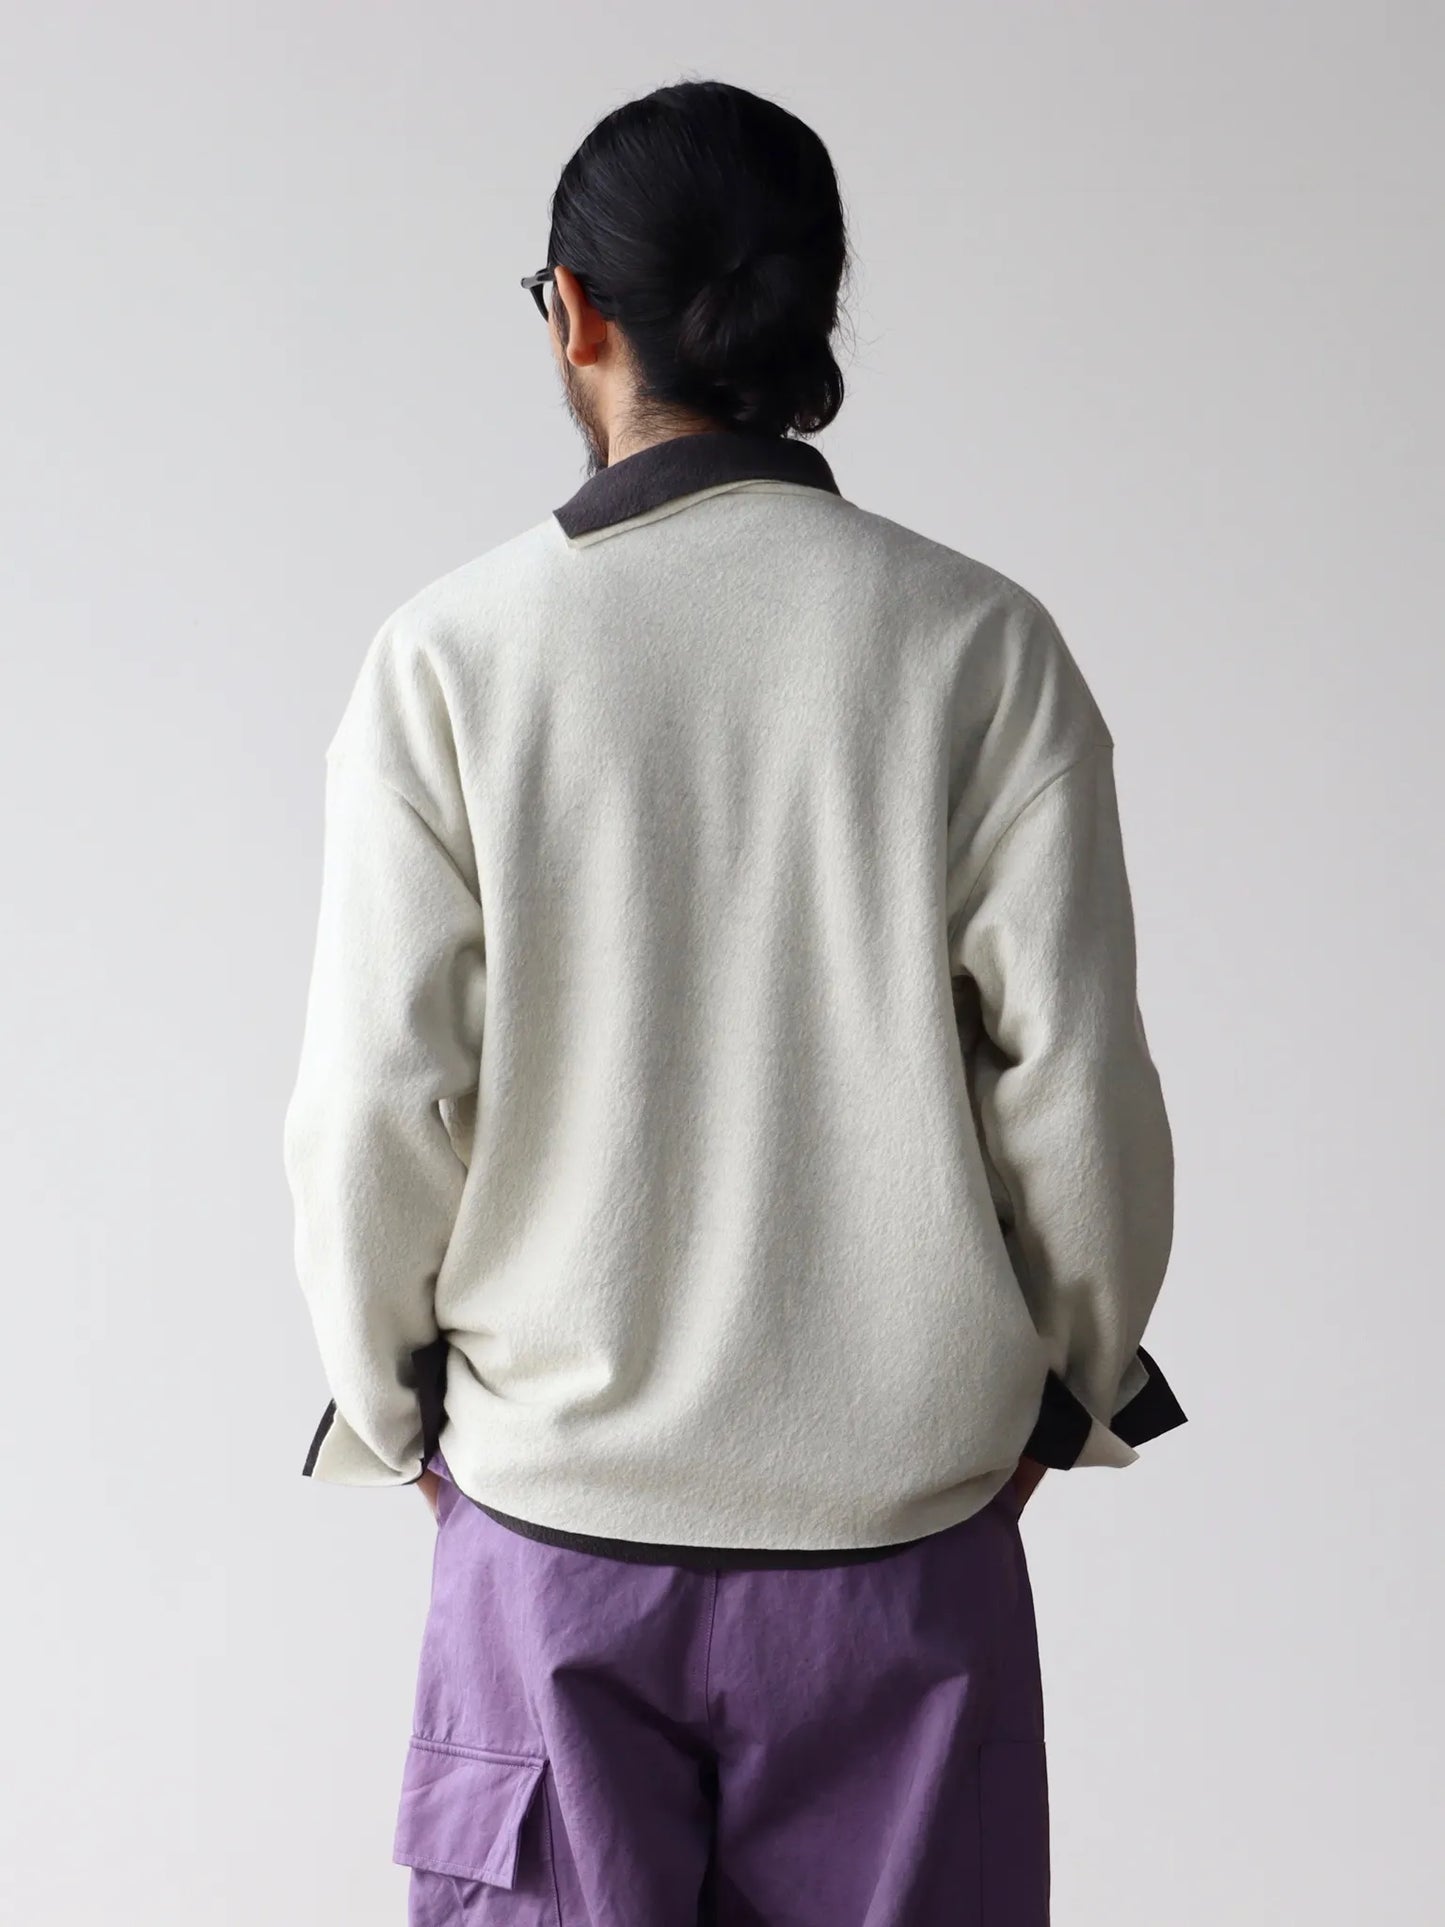 amachi-double-layer-wool-top-offf-white-x-flint-gray-6